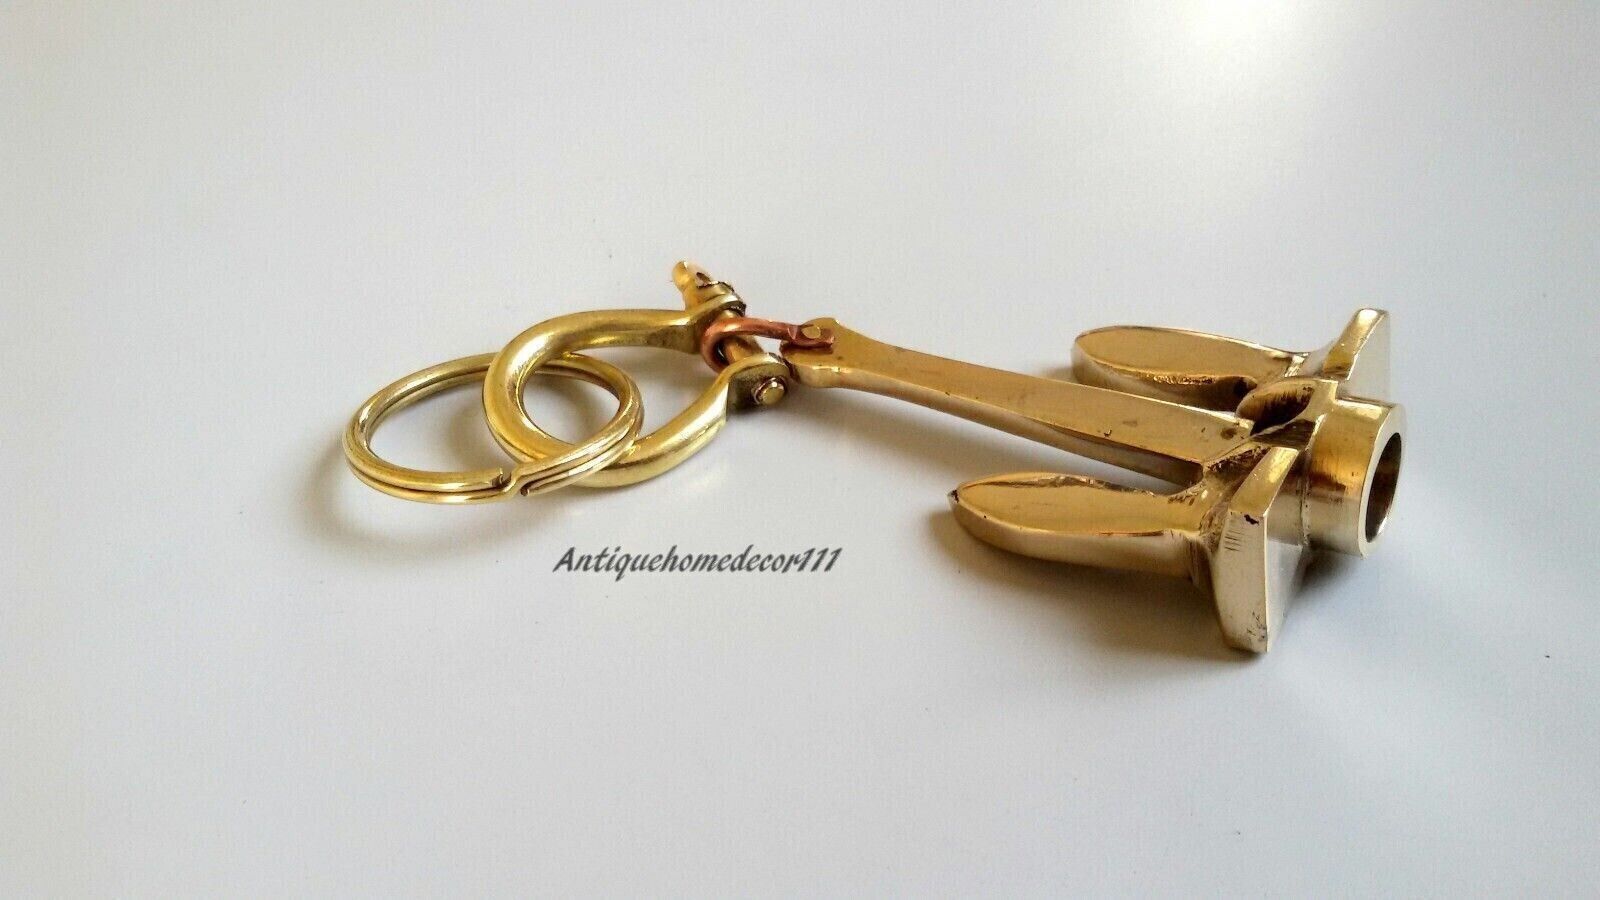 LOT OF 6 NAUTICIAL BRASS ANCHOR KEYCHAIN GOLDEN KEYCHAIN GIFT ITEM